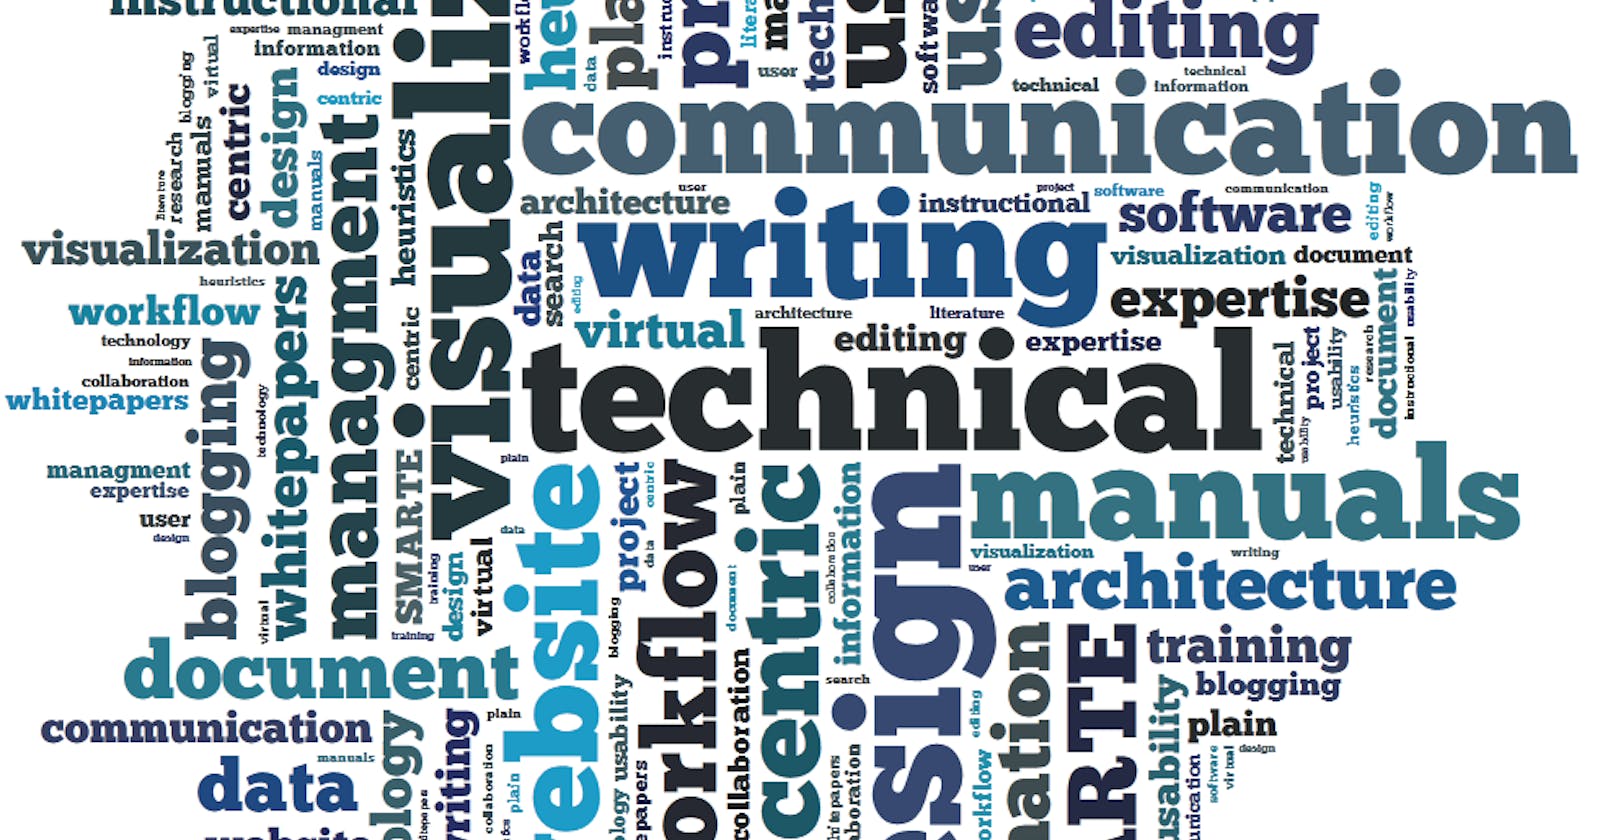 Fundamentals of Technical Writing